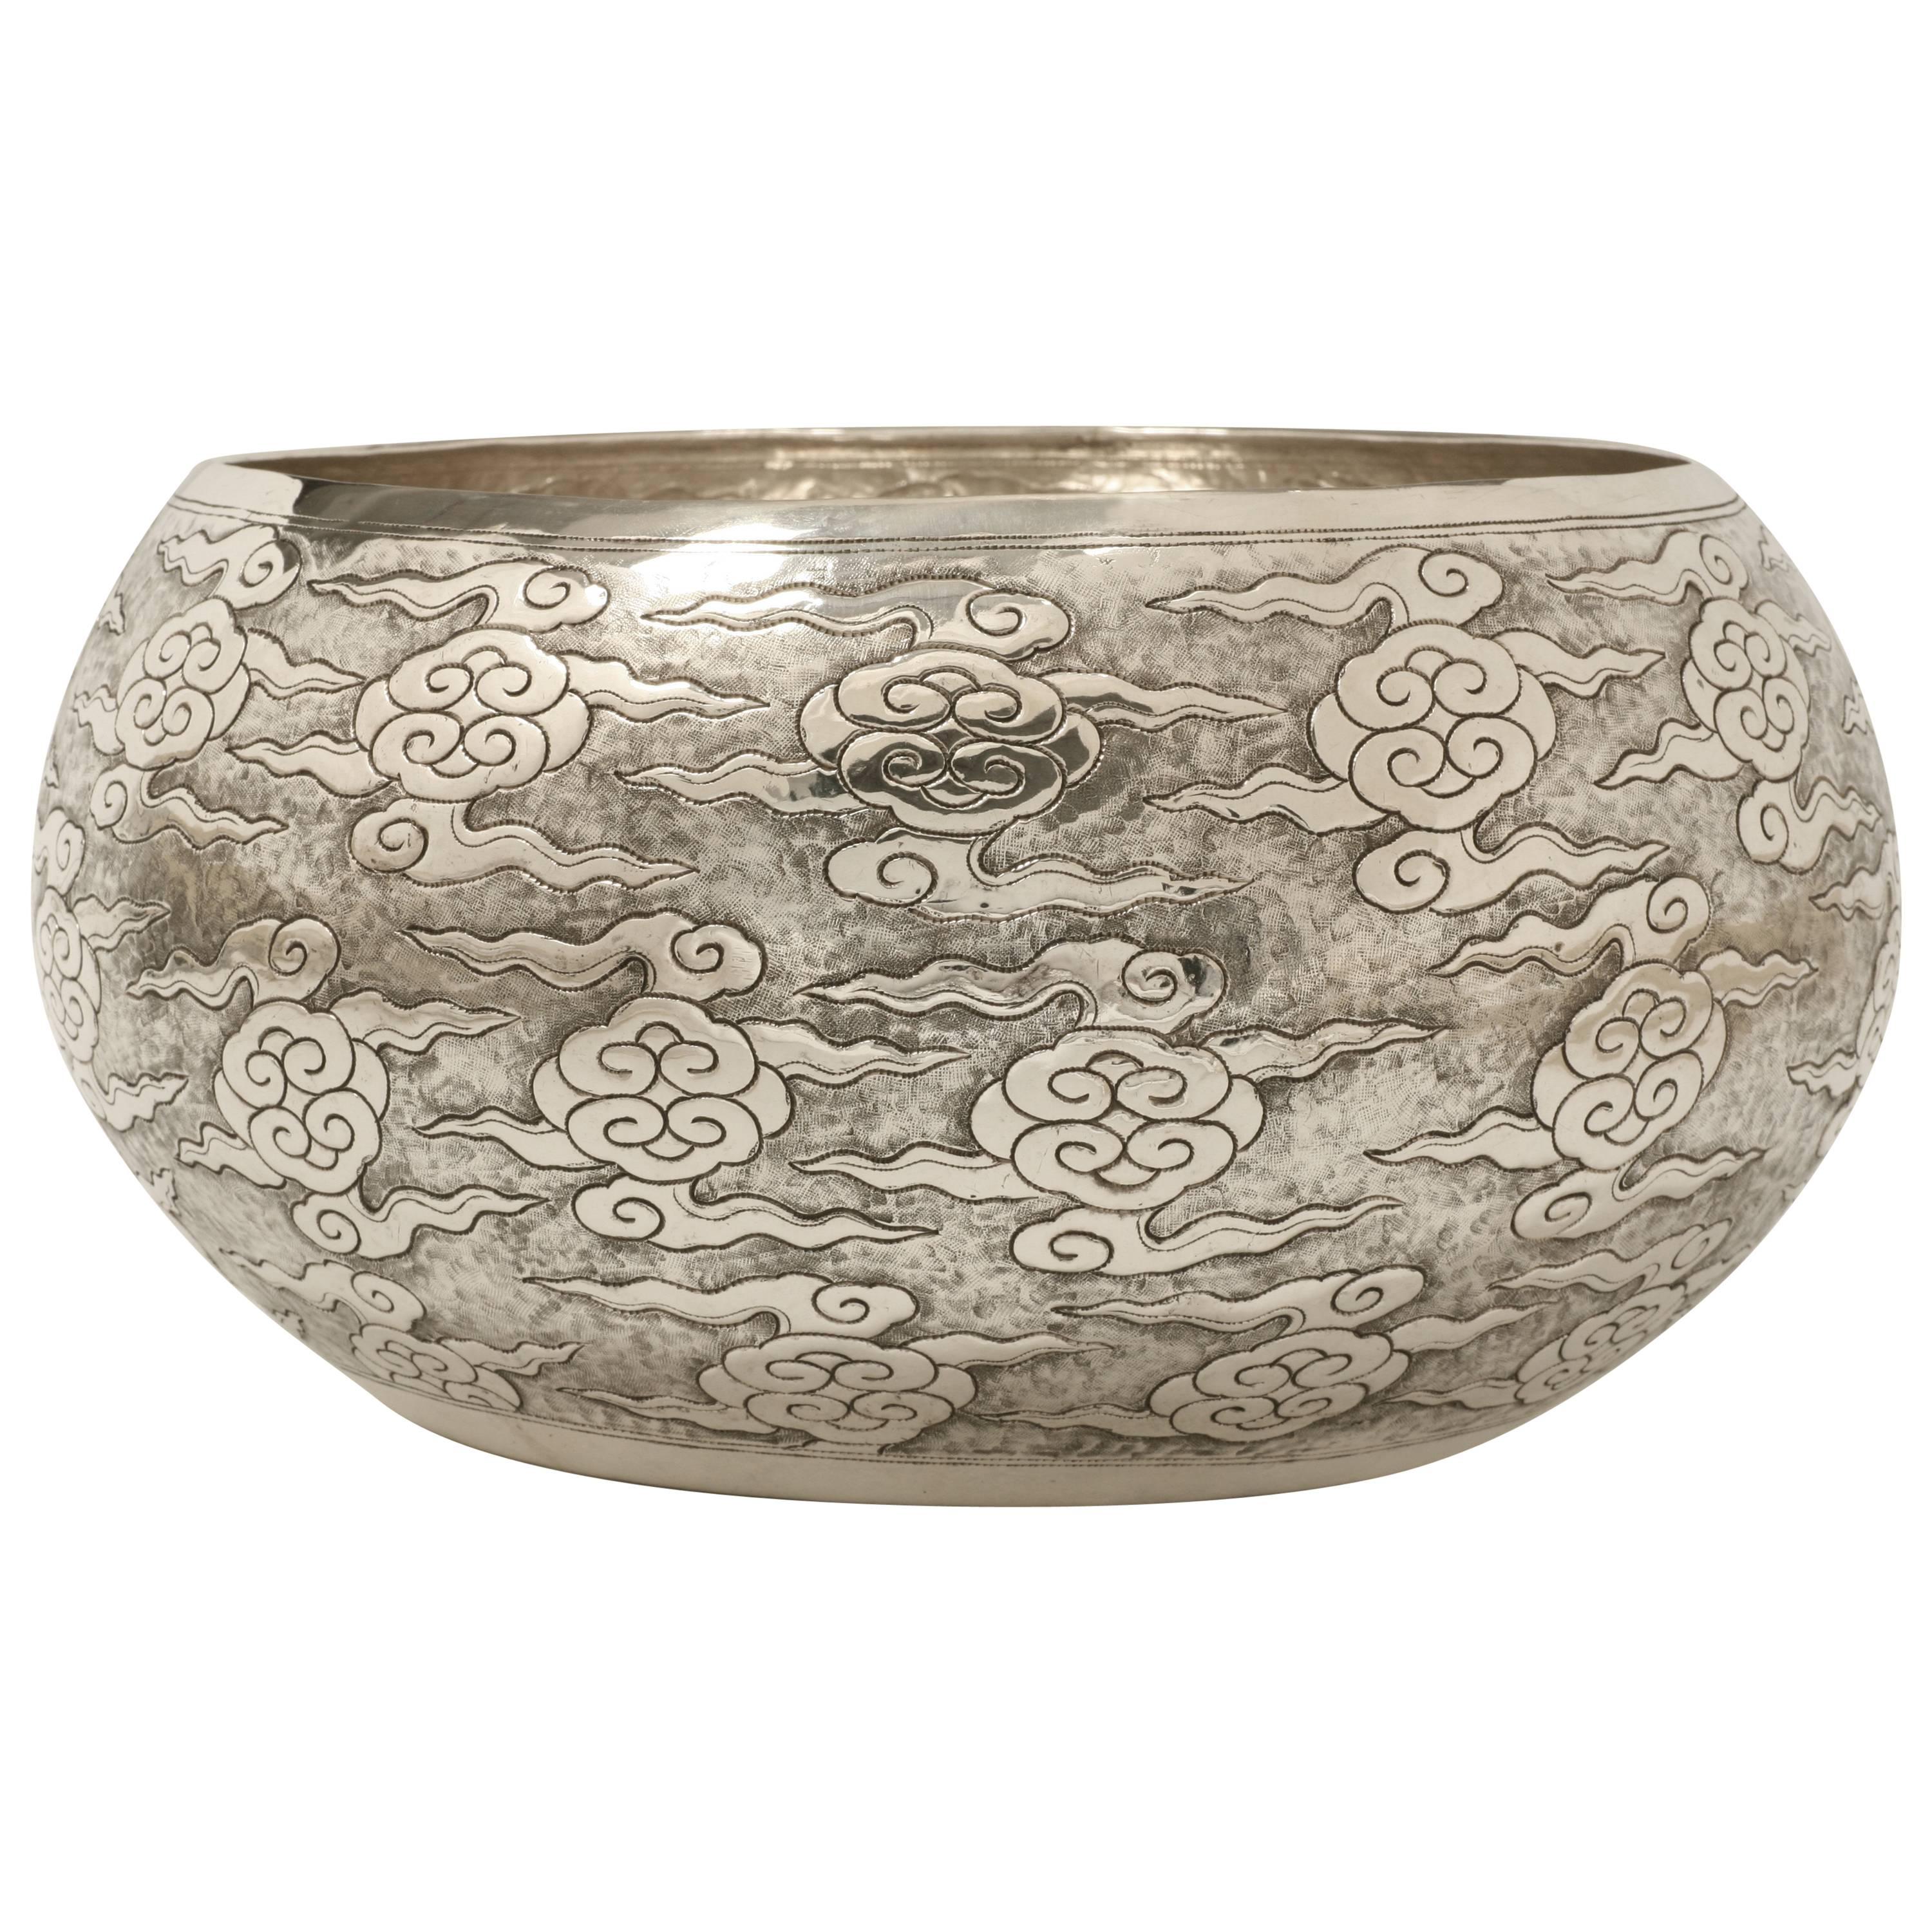 Large Hand-Worked Solid Silver Ceremonial Bowl, Cloud Motif, Centerpiece